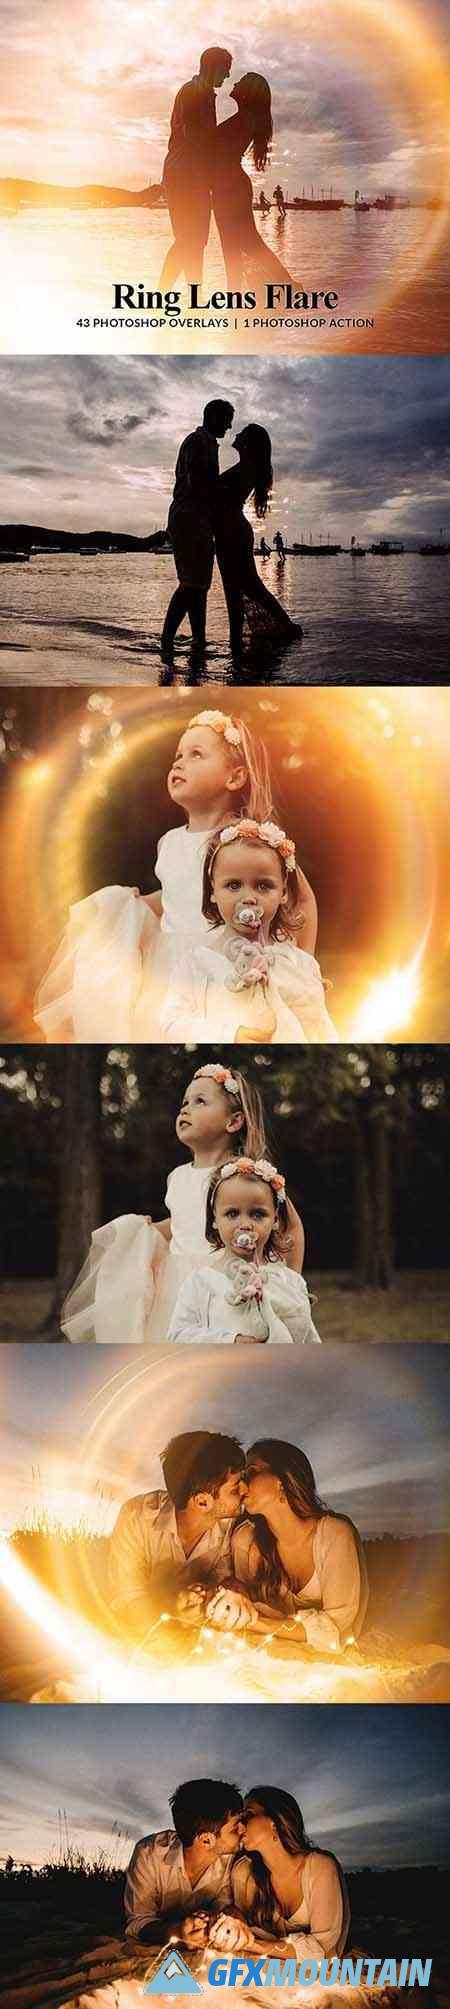 43 Ring Lens Flare Overlays & Photoshop Action 33003185